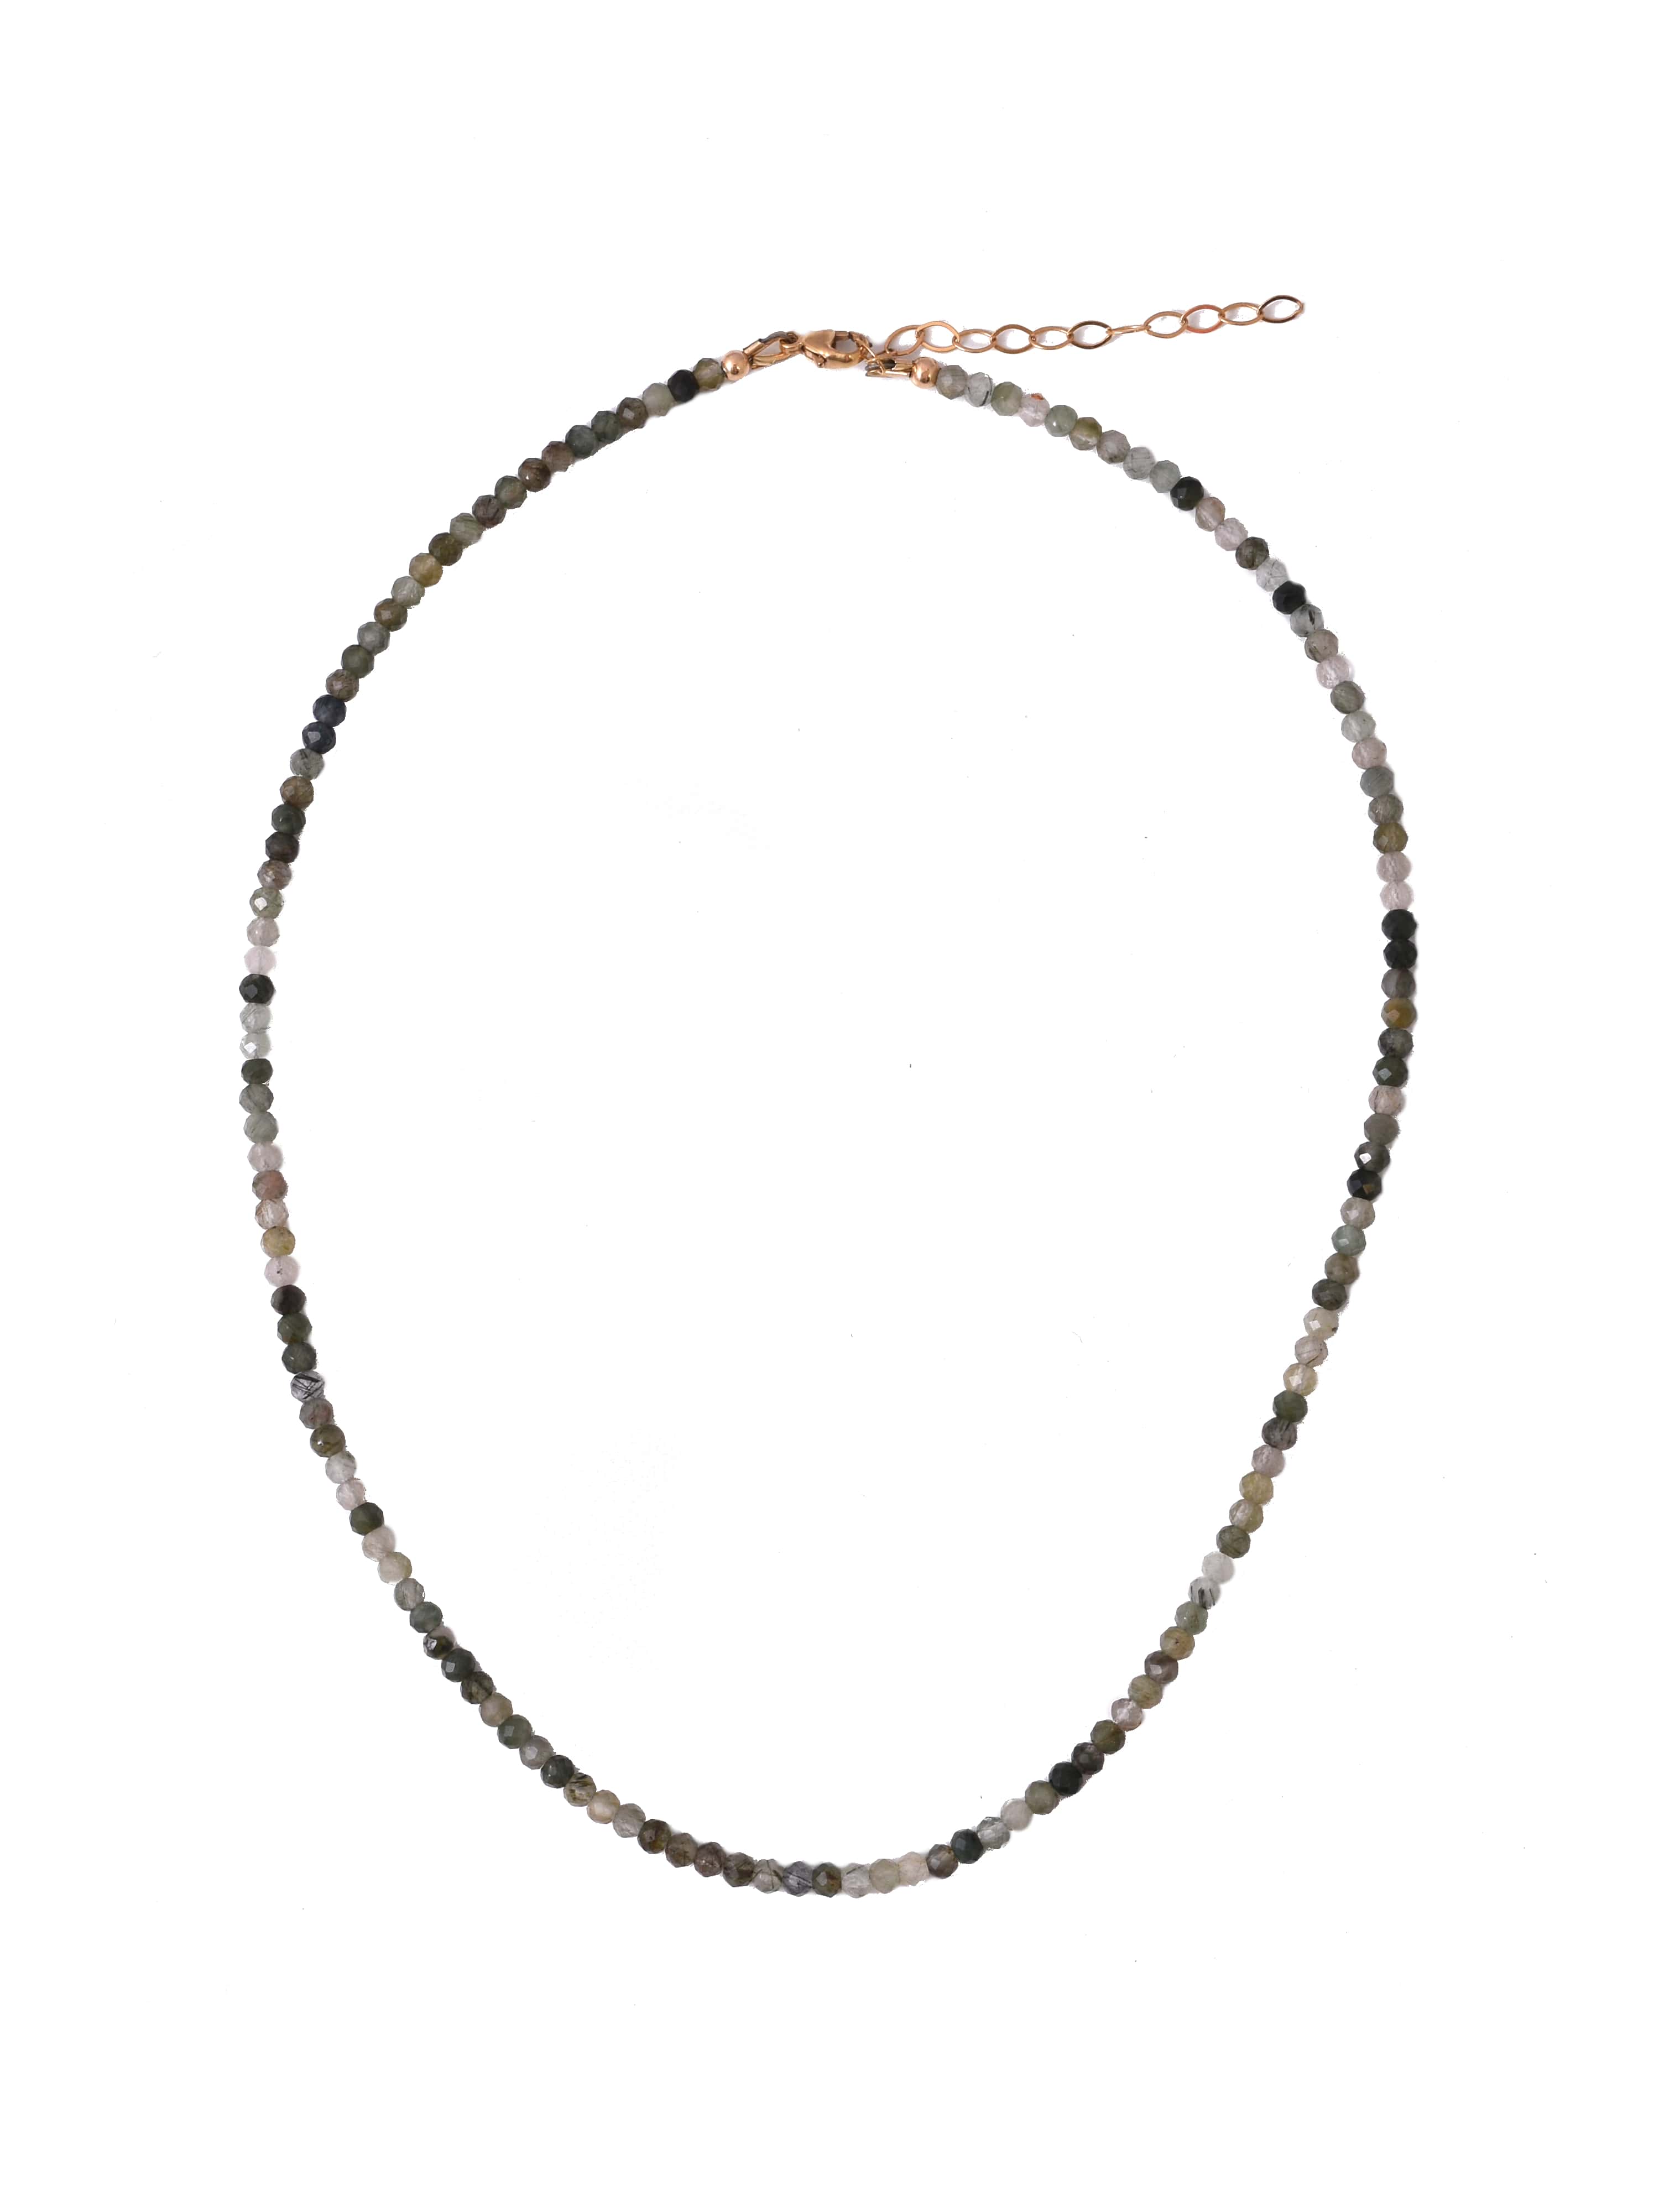 Moss Agate Dainty Beaded Necklace